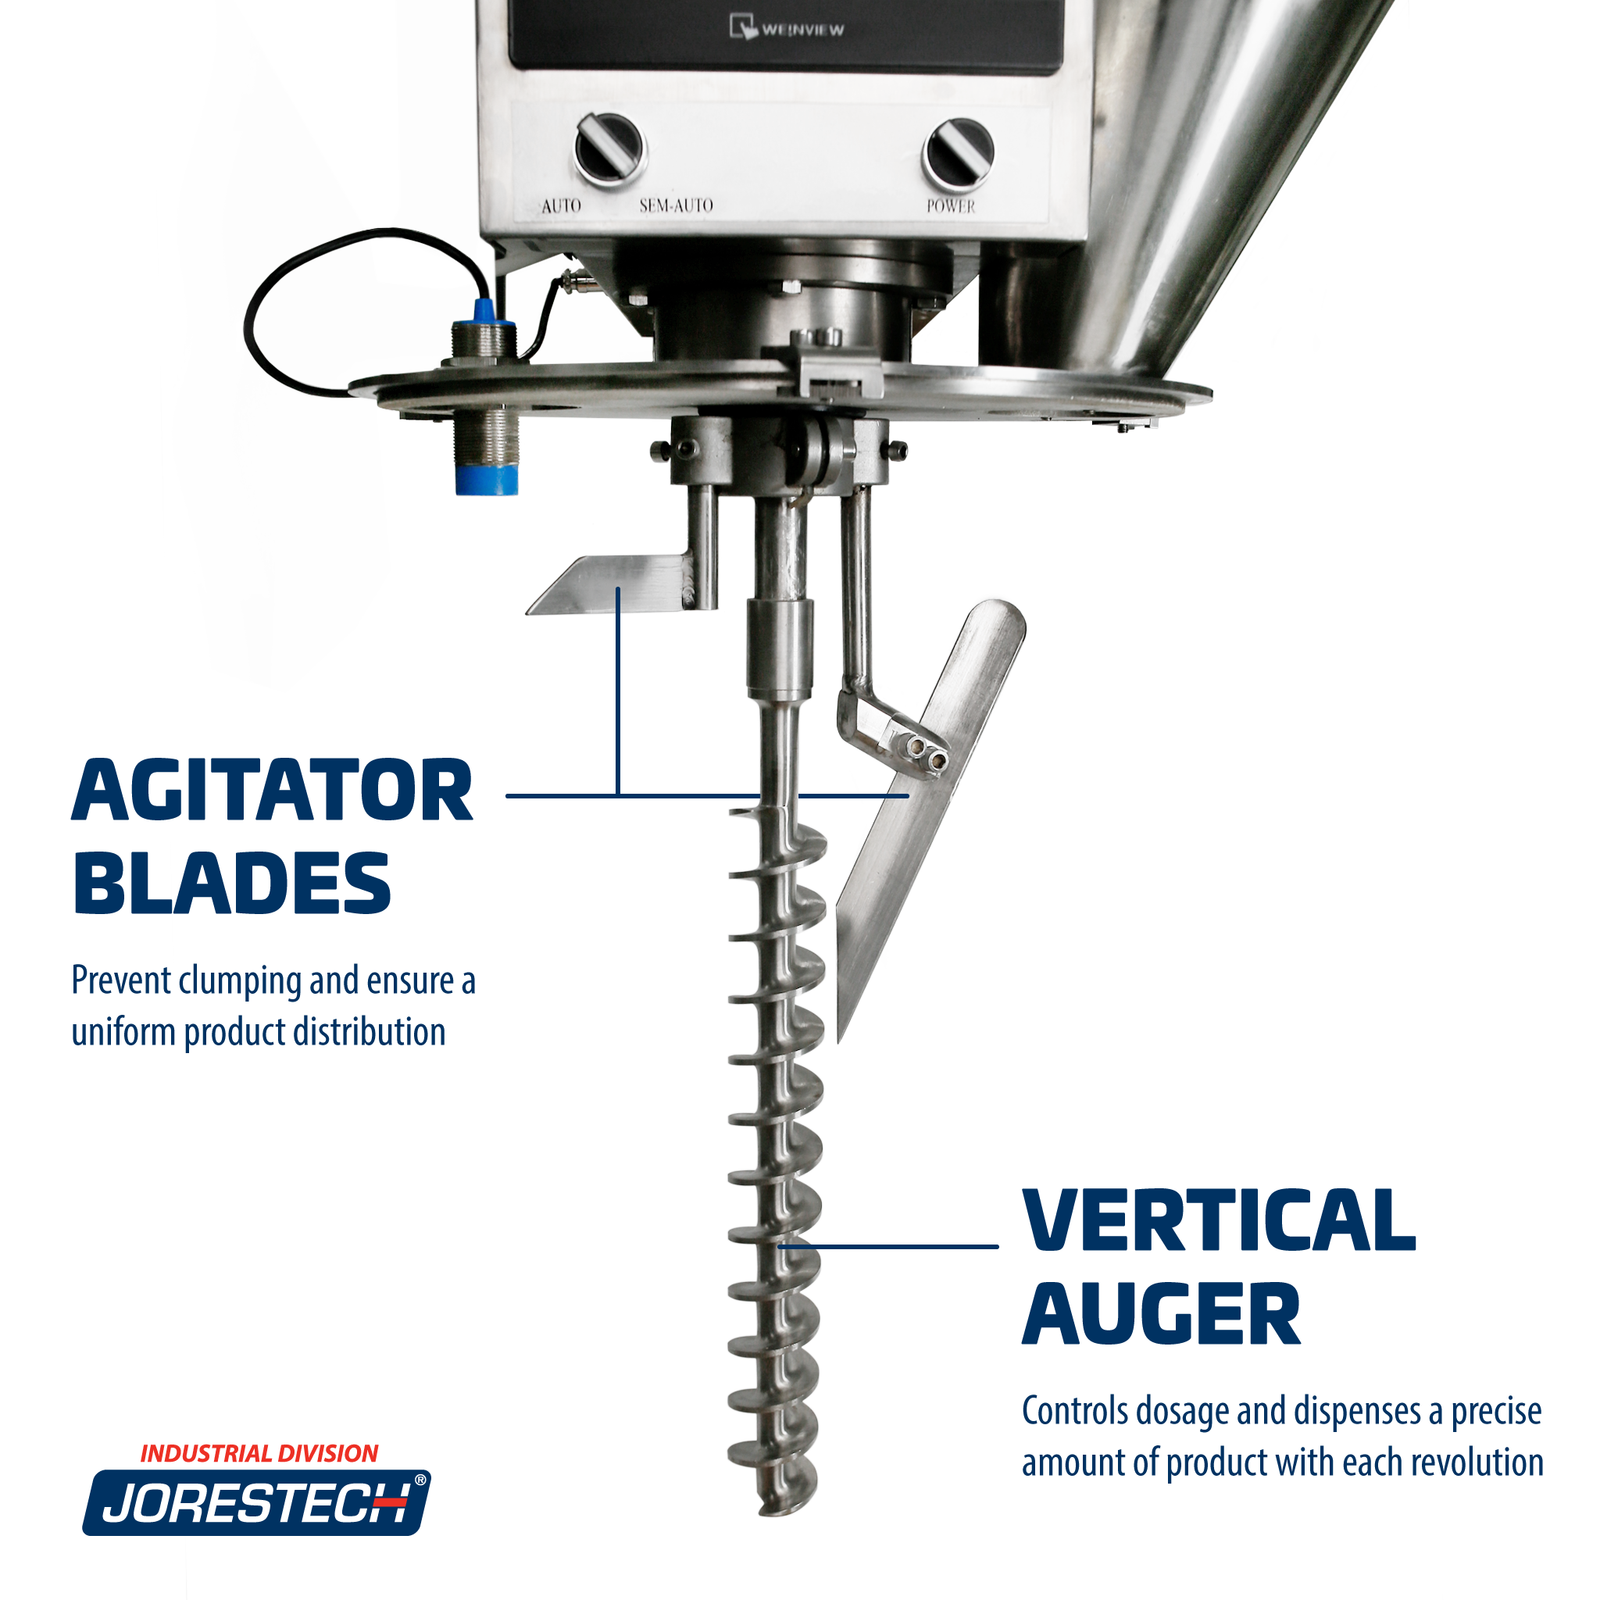 Close up of the semi-automatic auger powder filler for 20 ml showing the Vertical Auger and the Agitator Blades. Text reads: Vertical auger controls dosage and dispenses a precise amount of product each revolution. And also: Agitator blades prevent clumping and ensure a uniform product distribution.